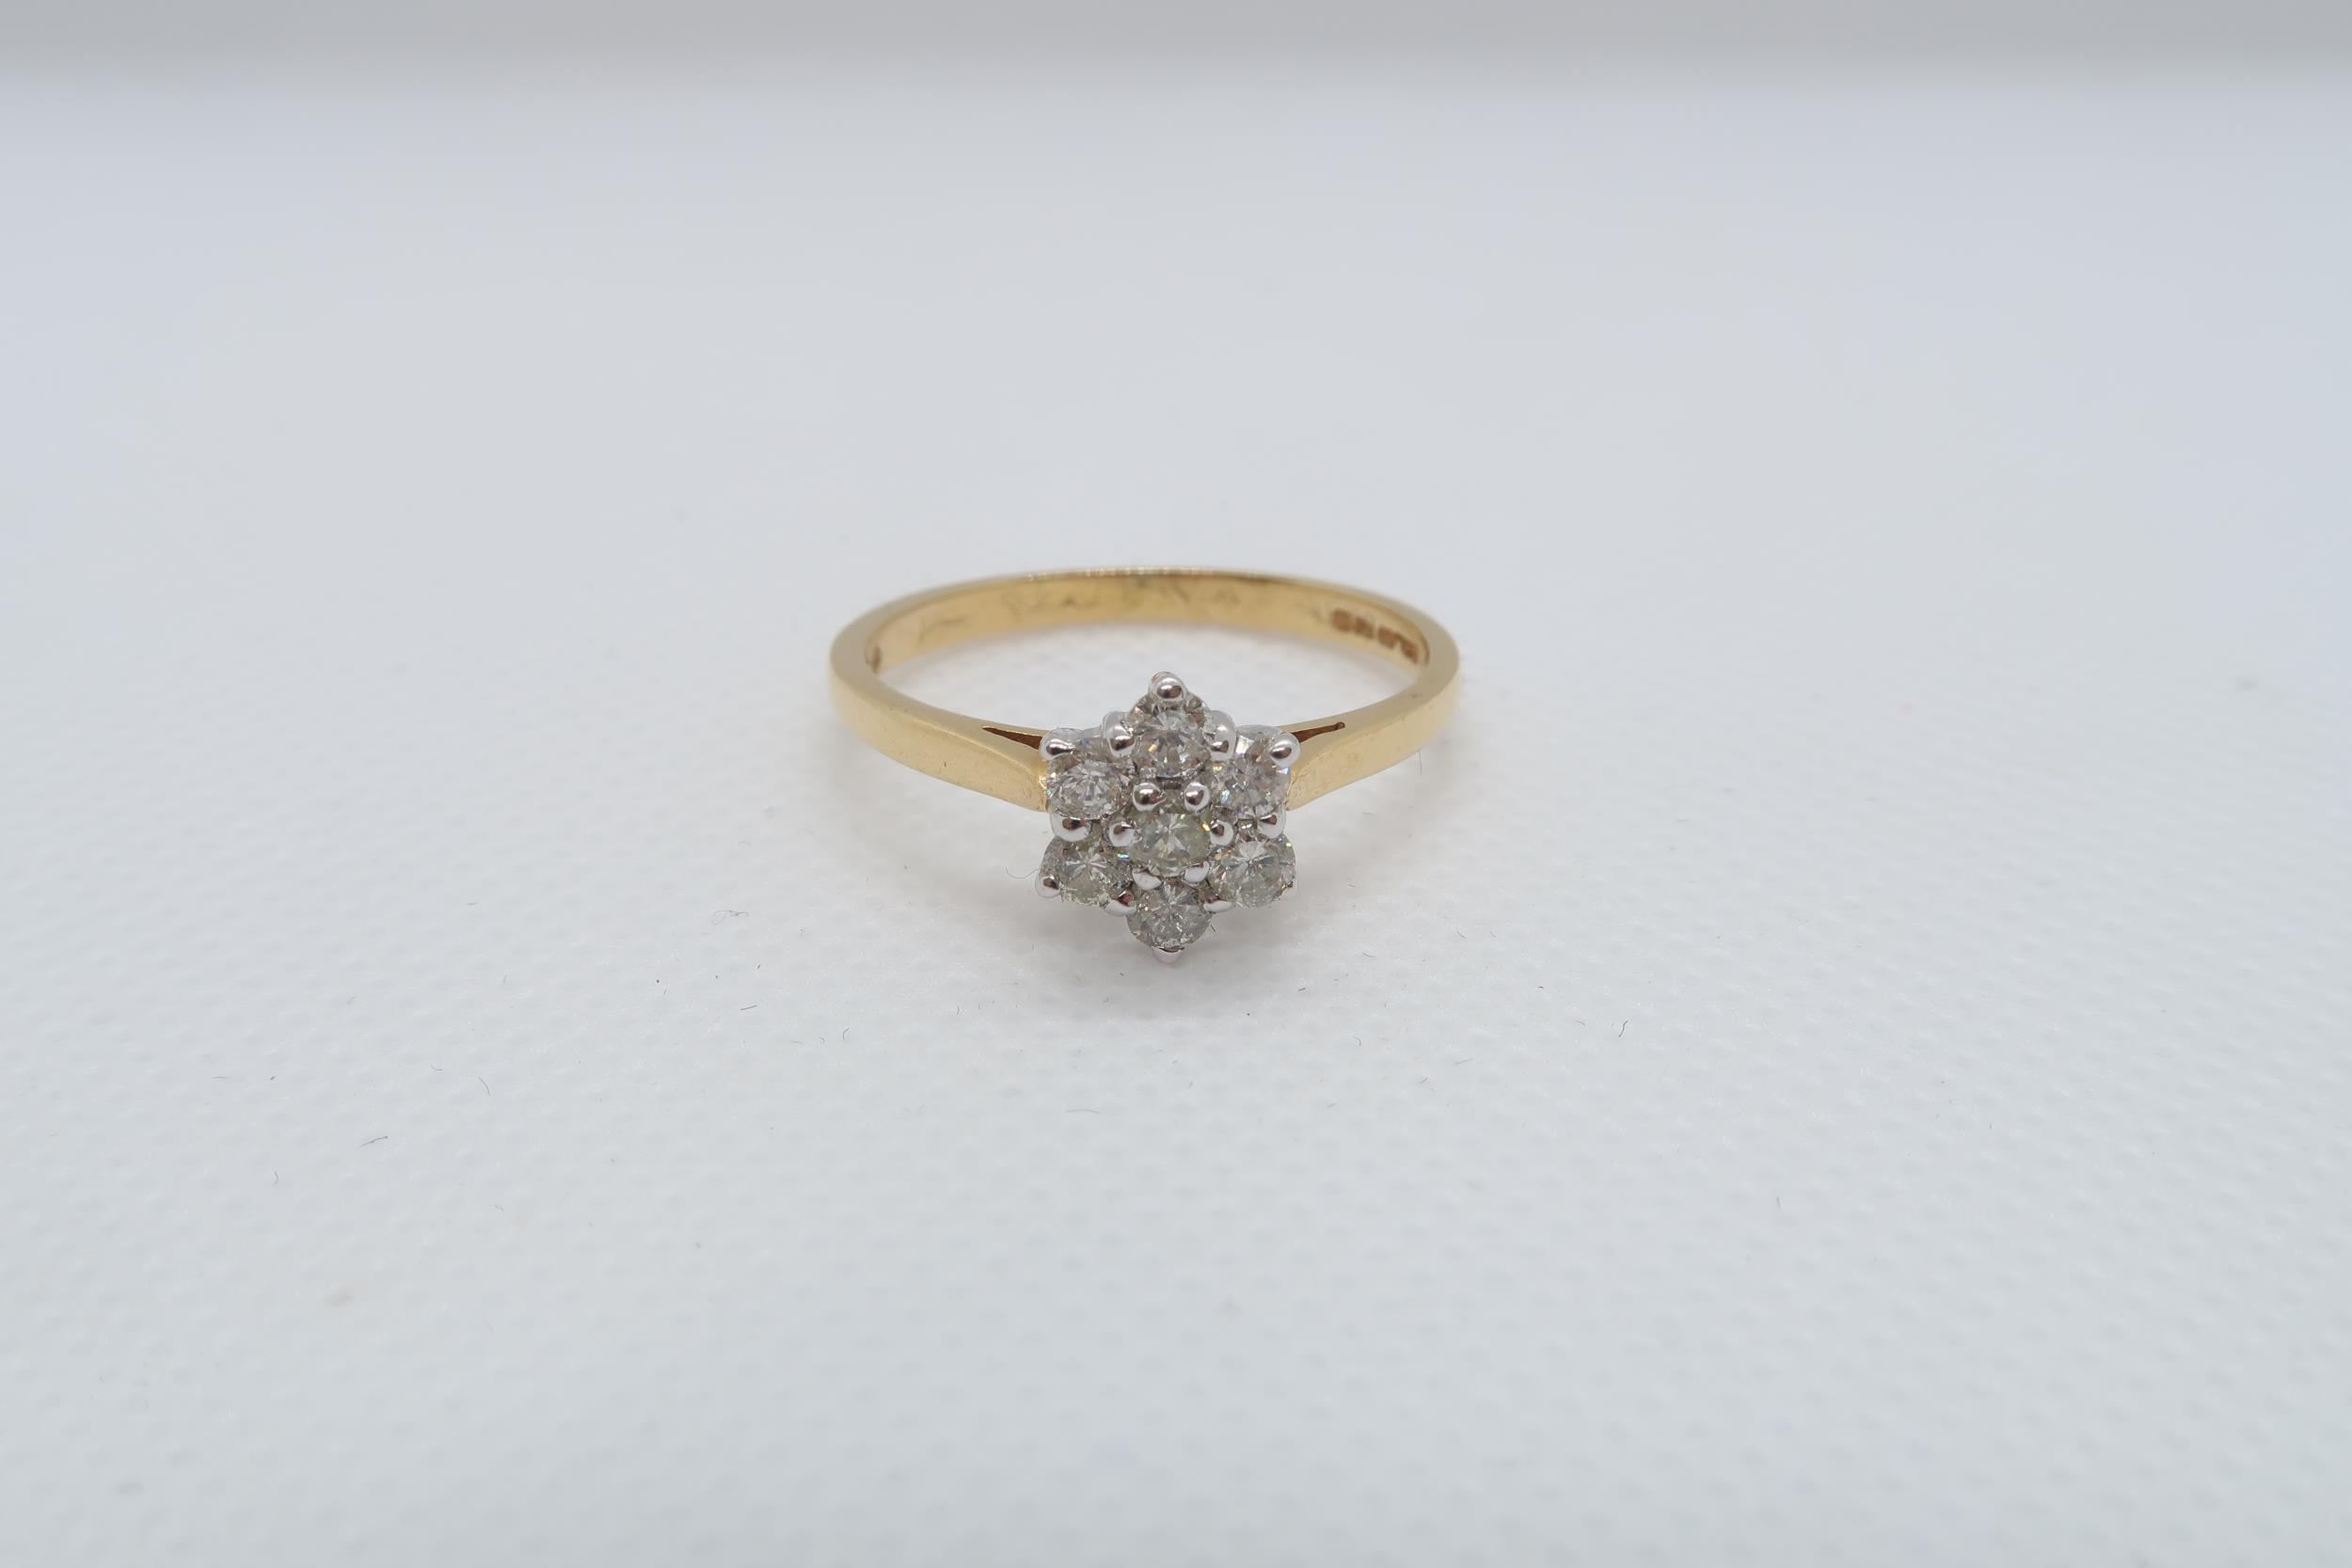 An 18ct yellow gold (hallmarked) and diamond daisy cluster ring size V - approx weight 3.7 grams